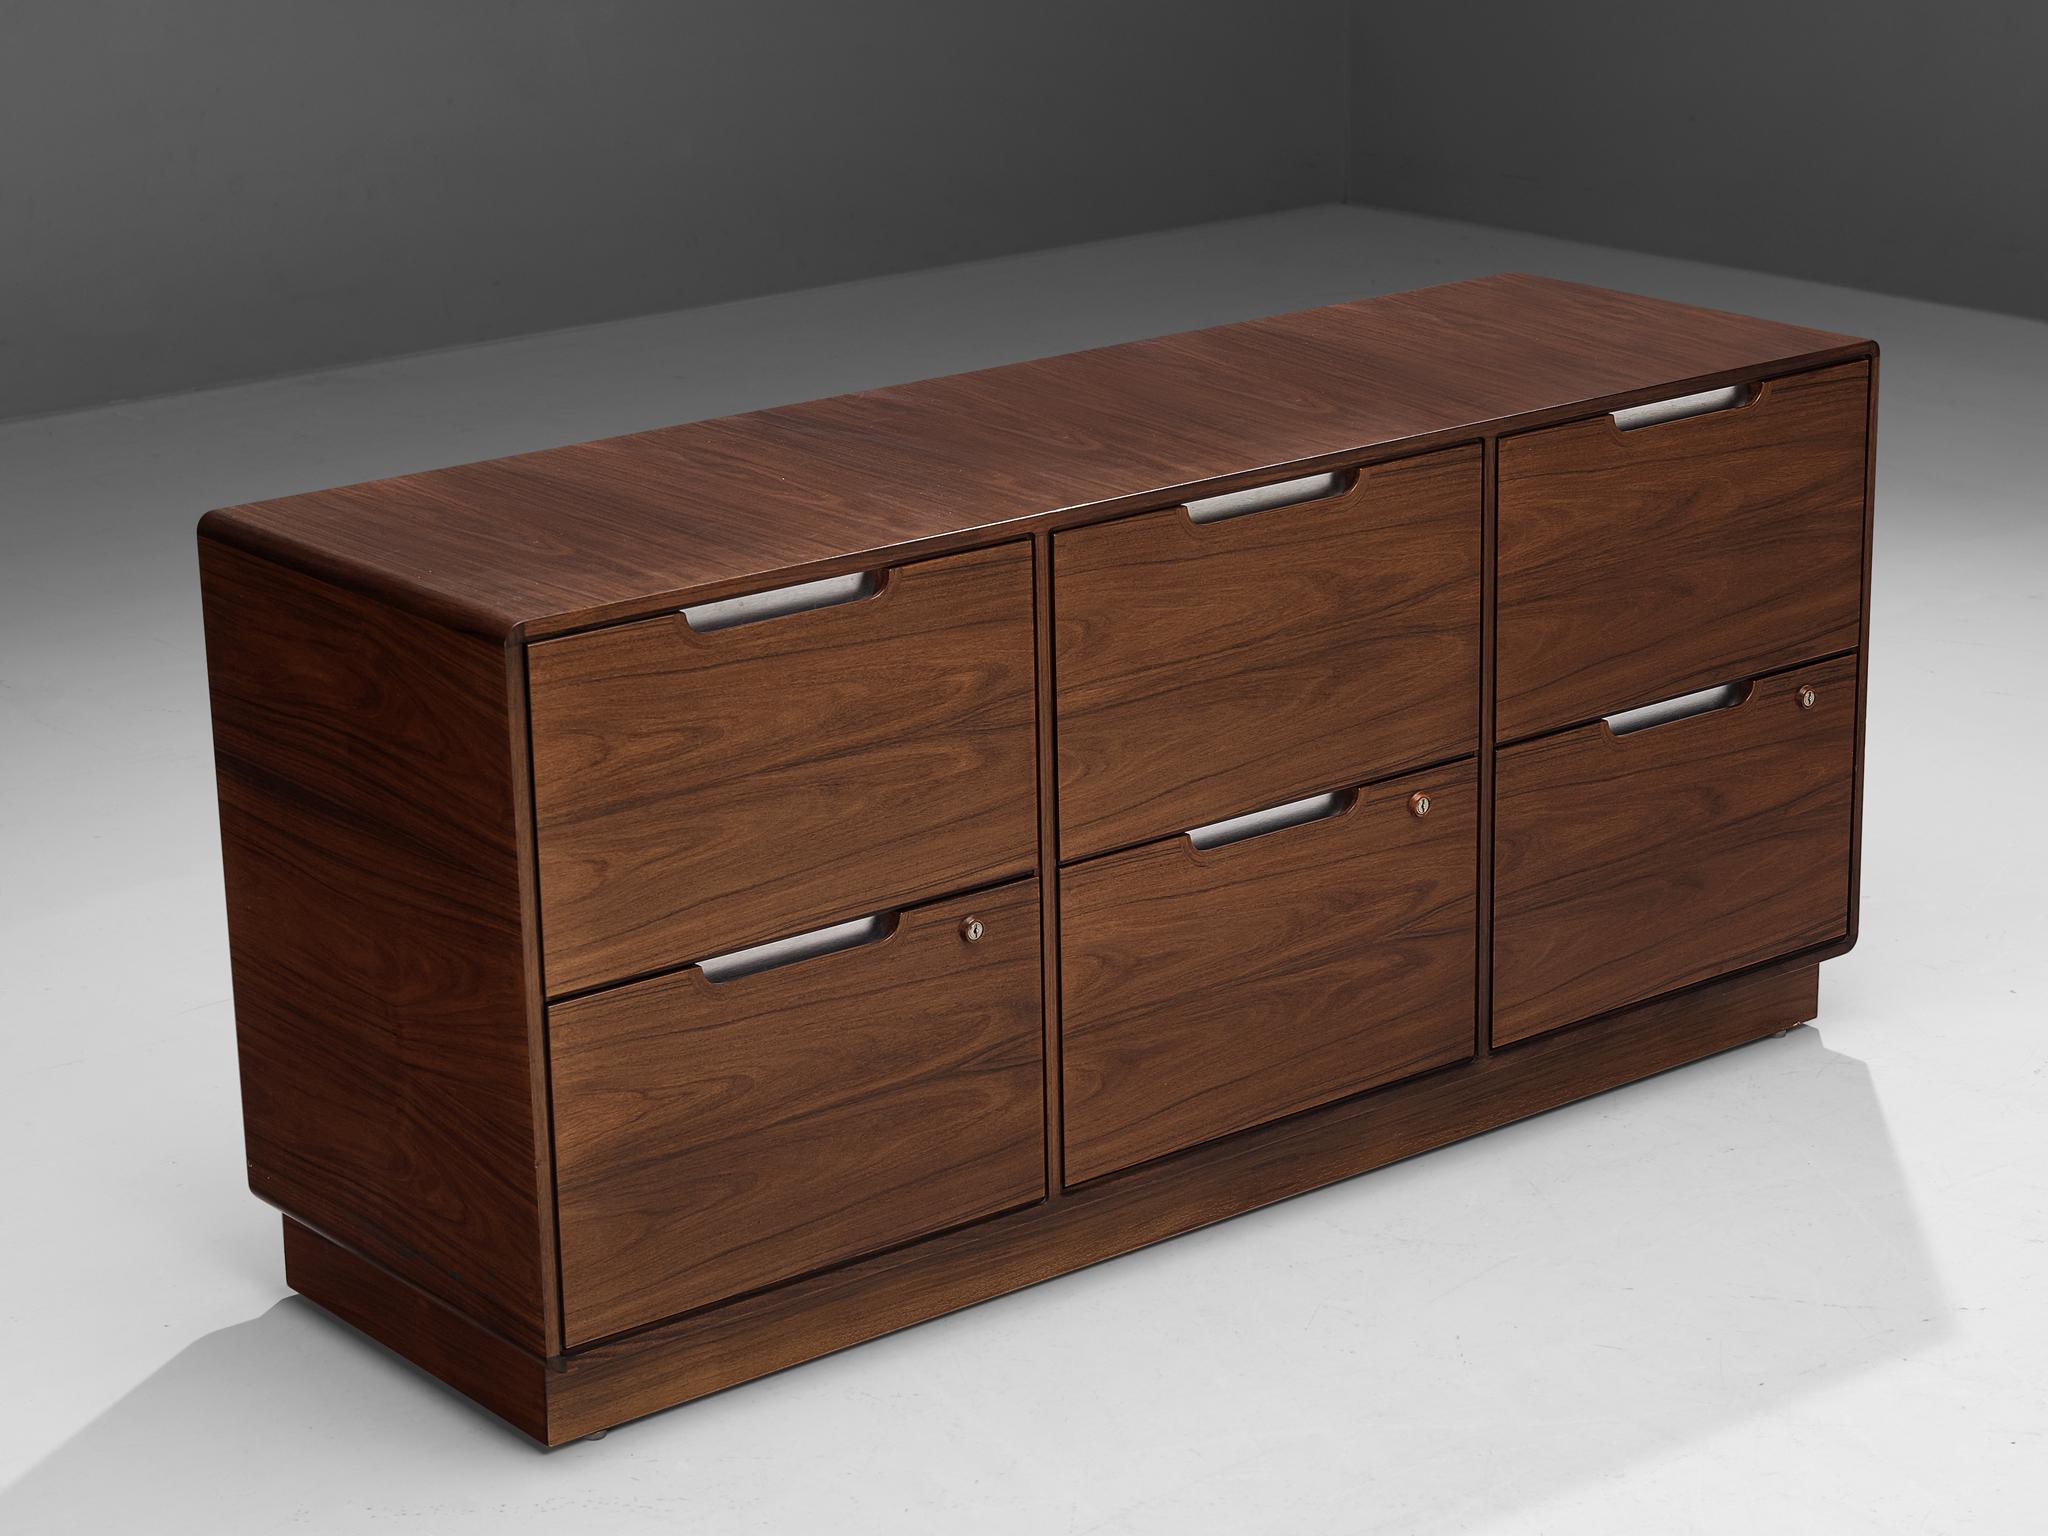 Posborg & Meyhoff for Sibast Møbler Cabinet with Six Drawers in Pau Ferro 3